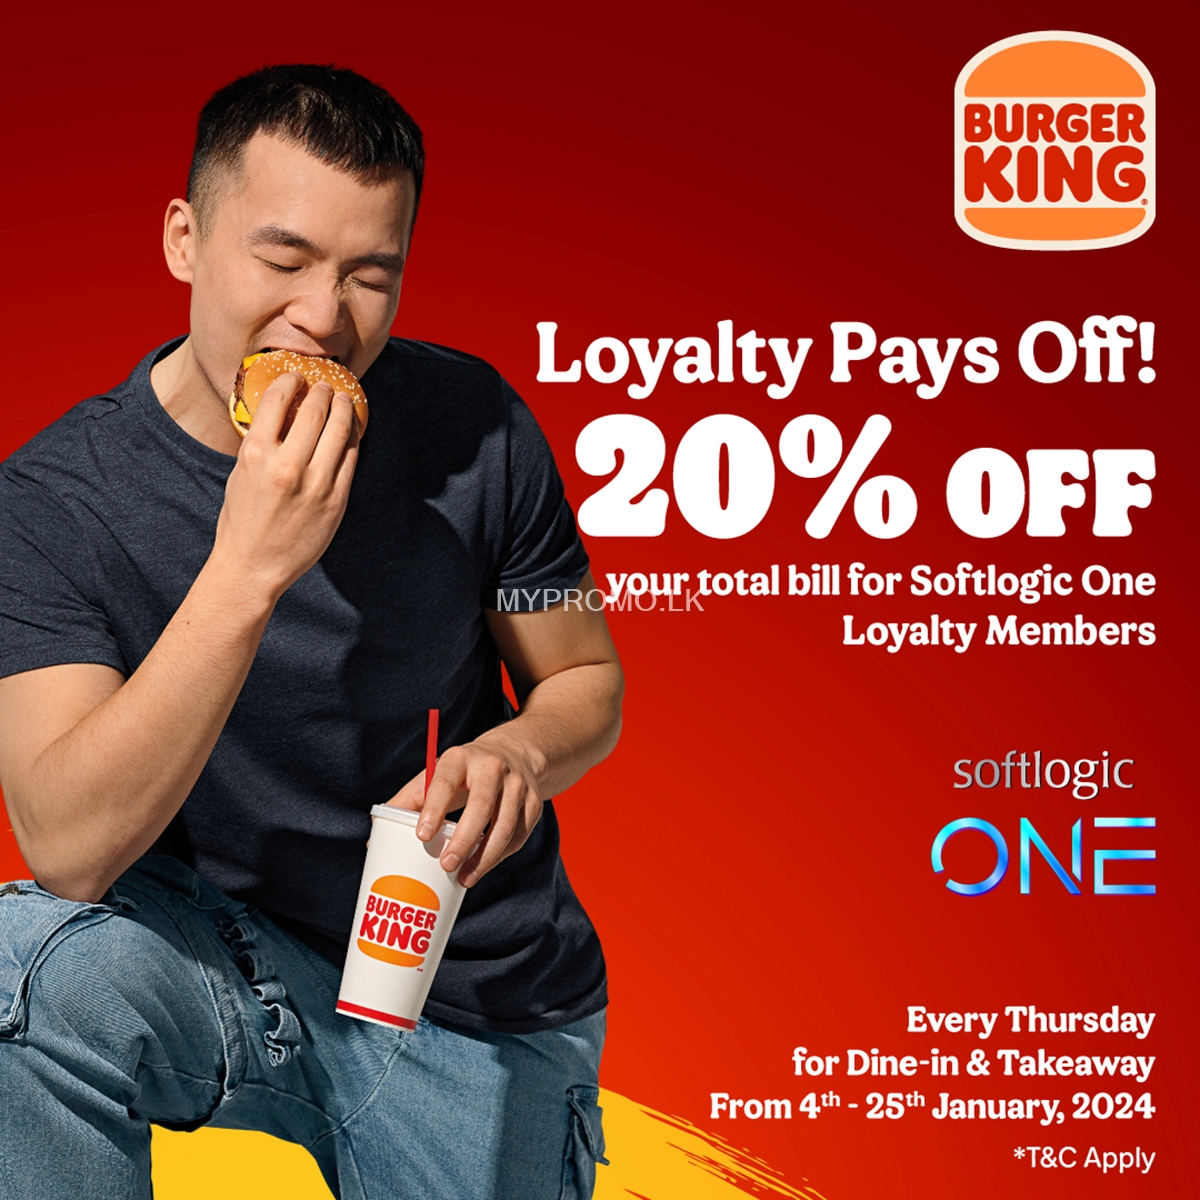 Exclusive Offer for Softlogic loyalty customers on Thursdays at Burger King